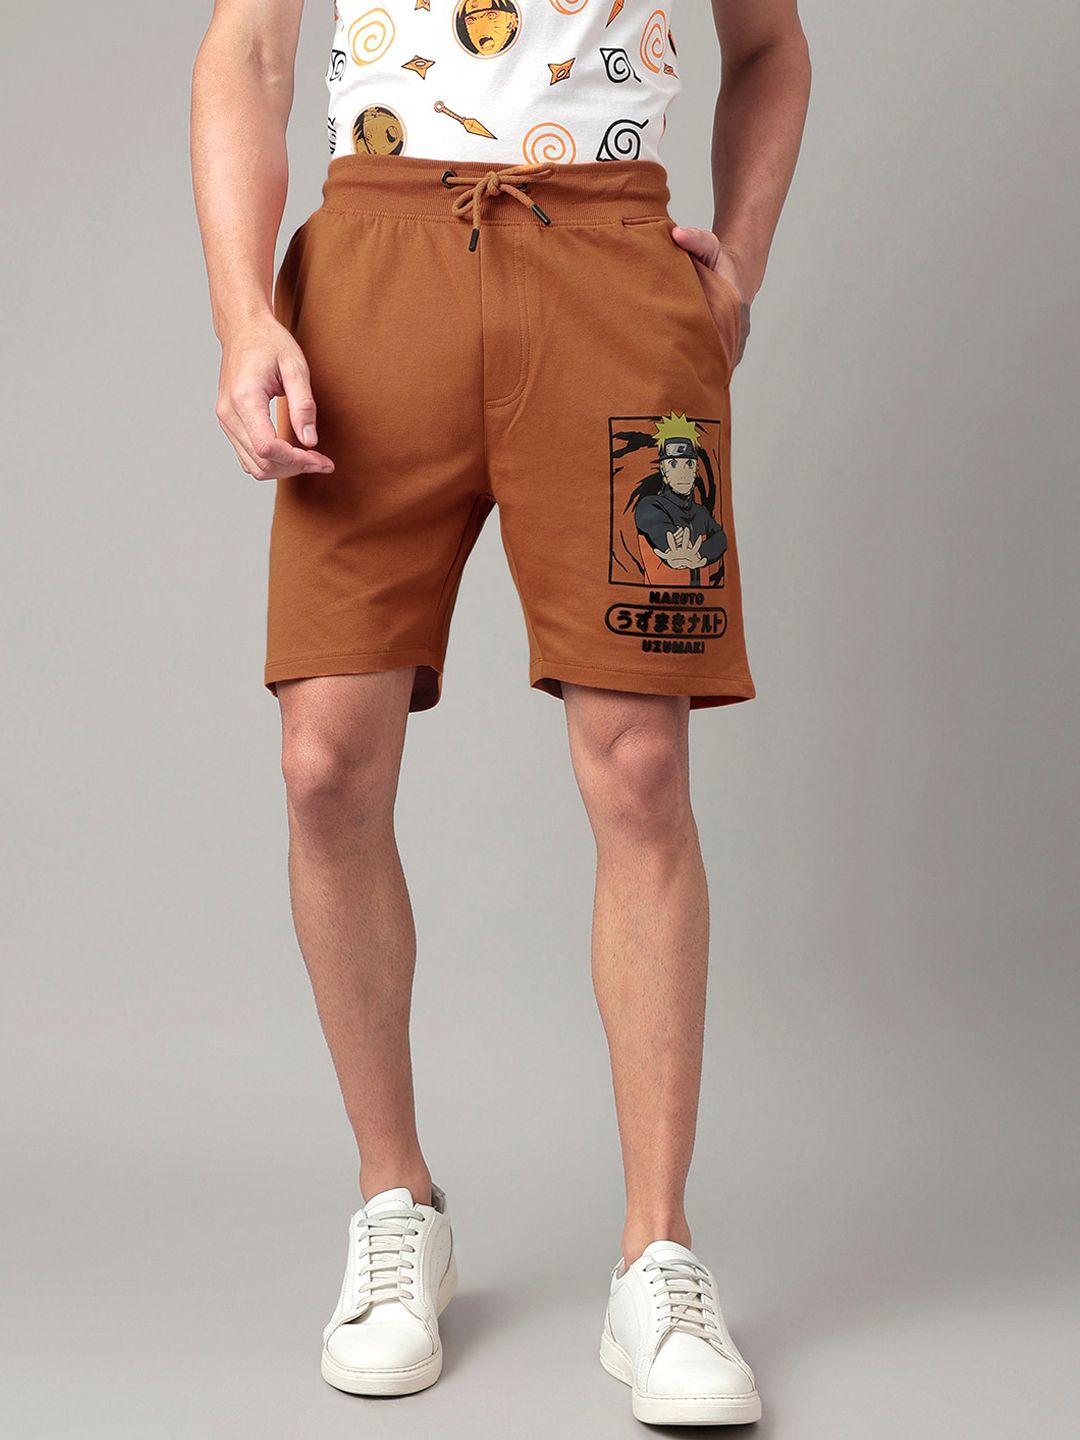 free authority new naruto printed thai curry shorts